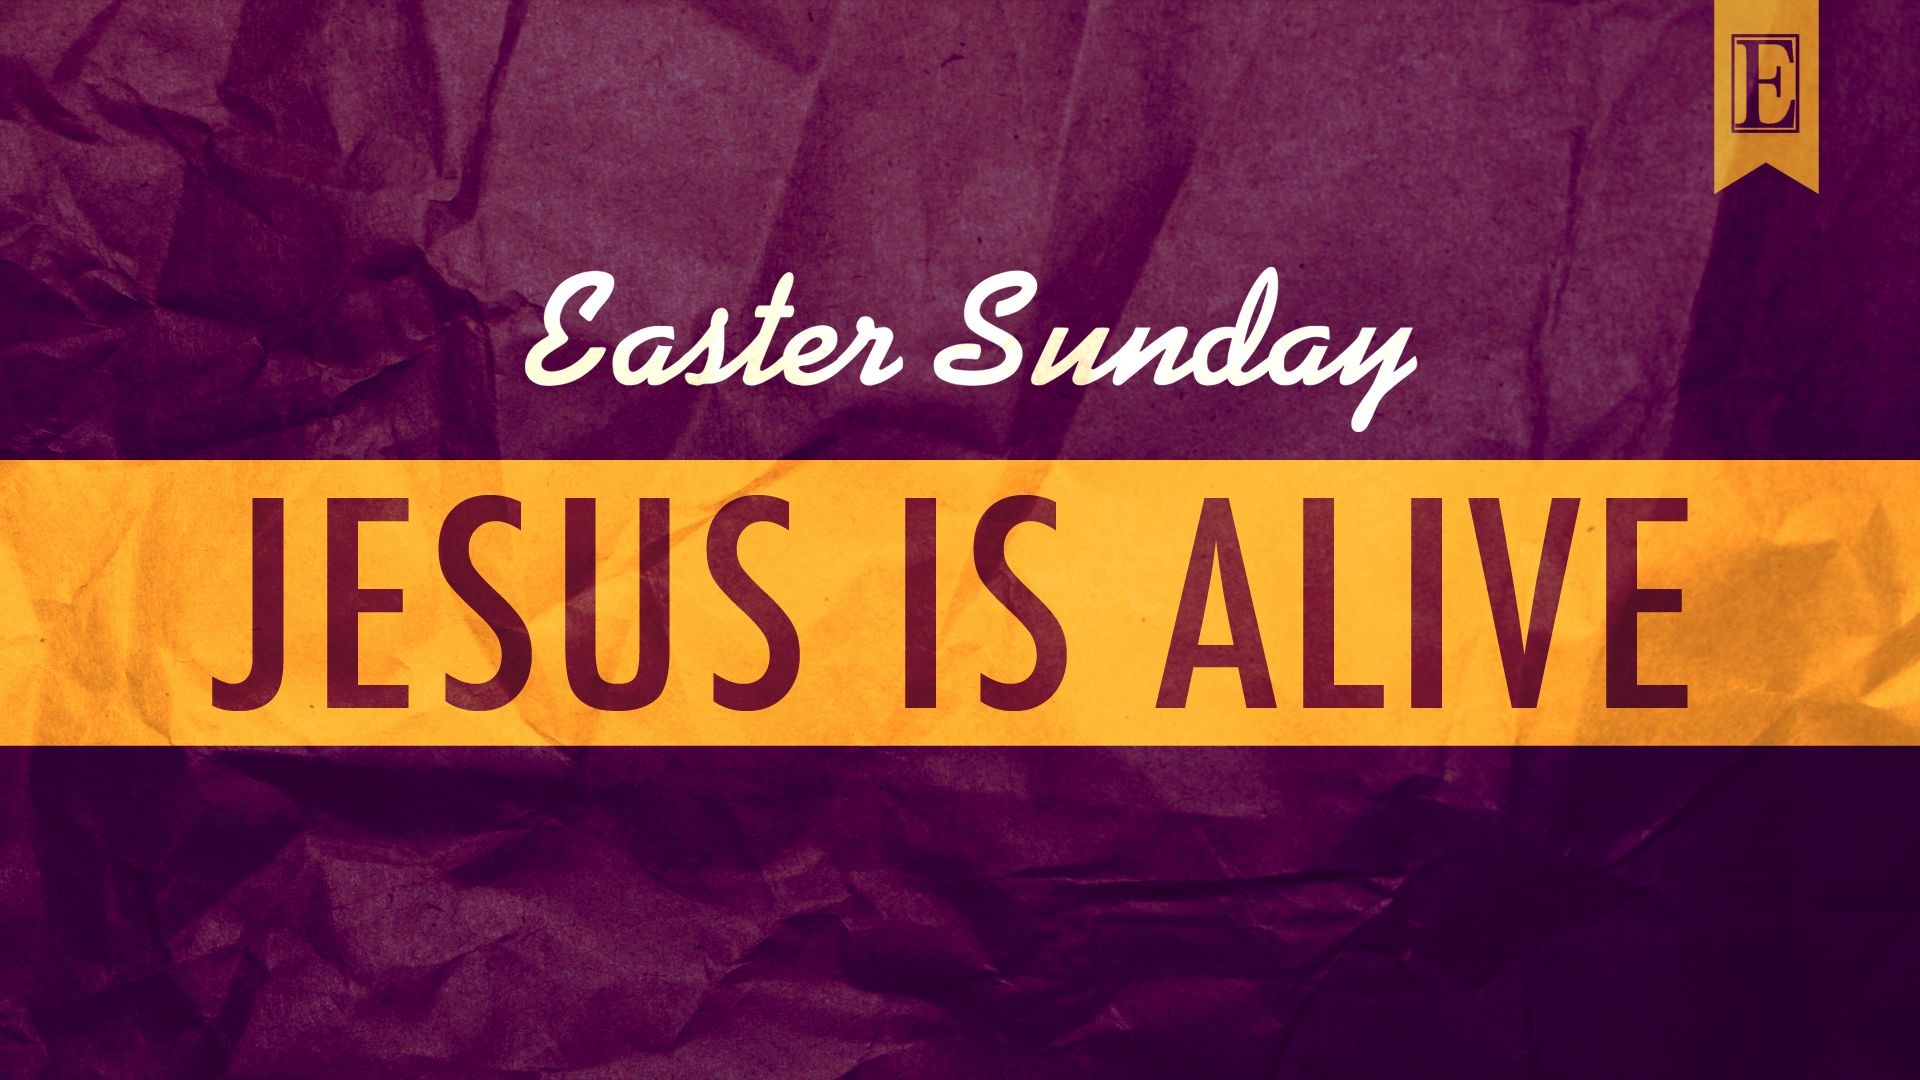 1920x1080 Image result for jesus is alive and images of a easter hat and a cane